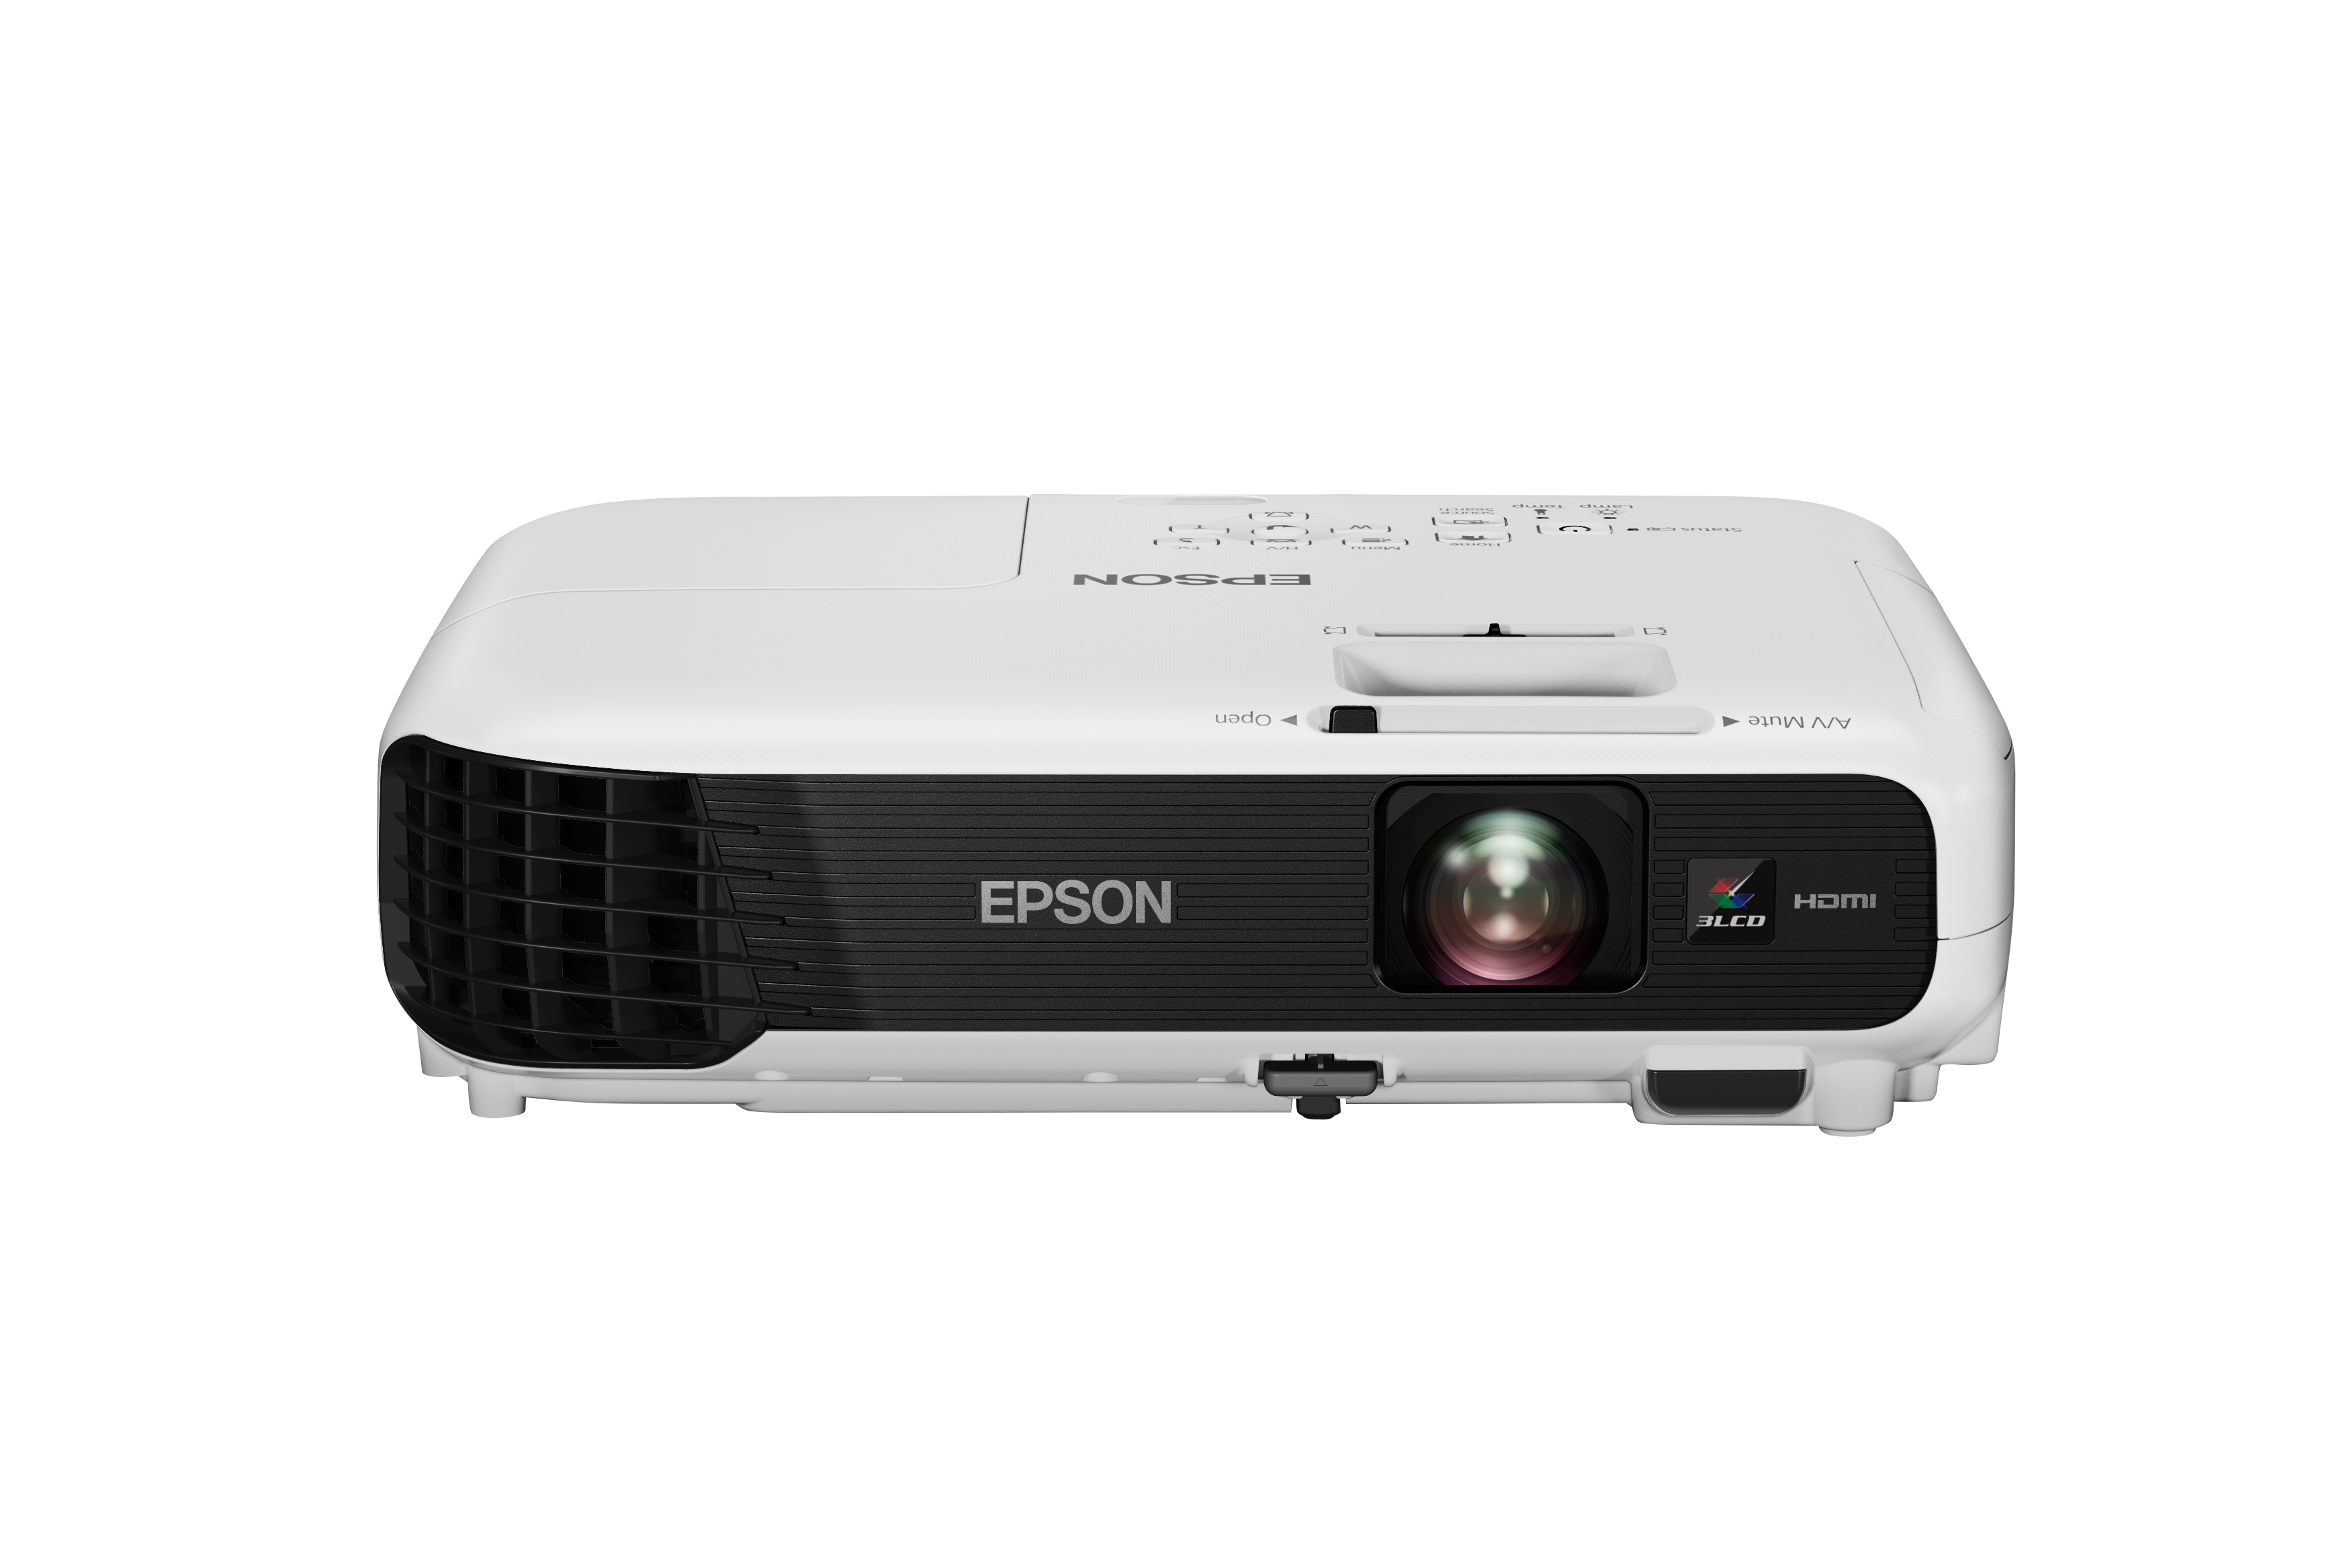 EB-S04 | Mobile | Projectors | Products | Epson Europe